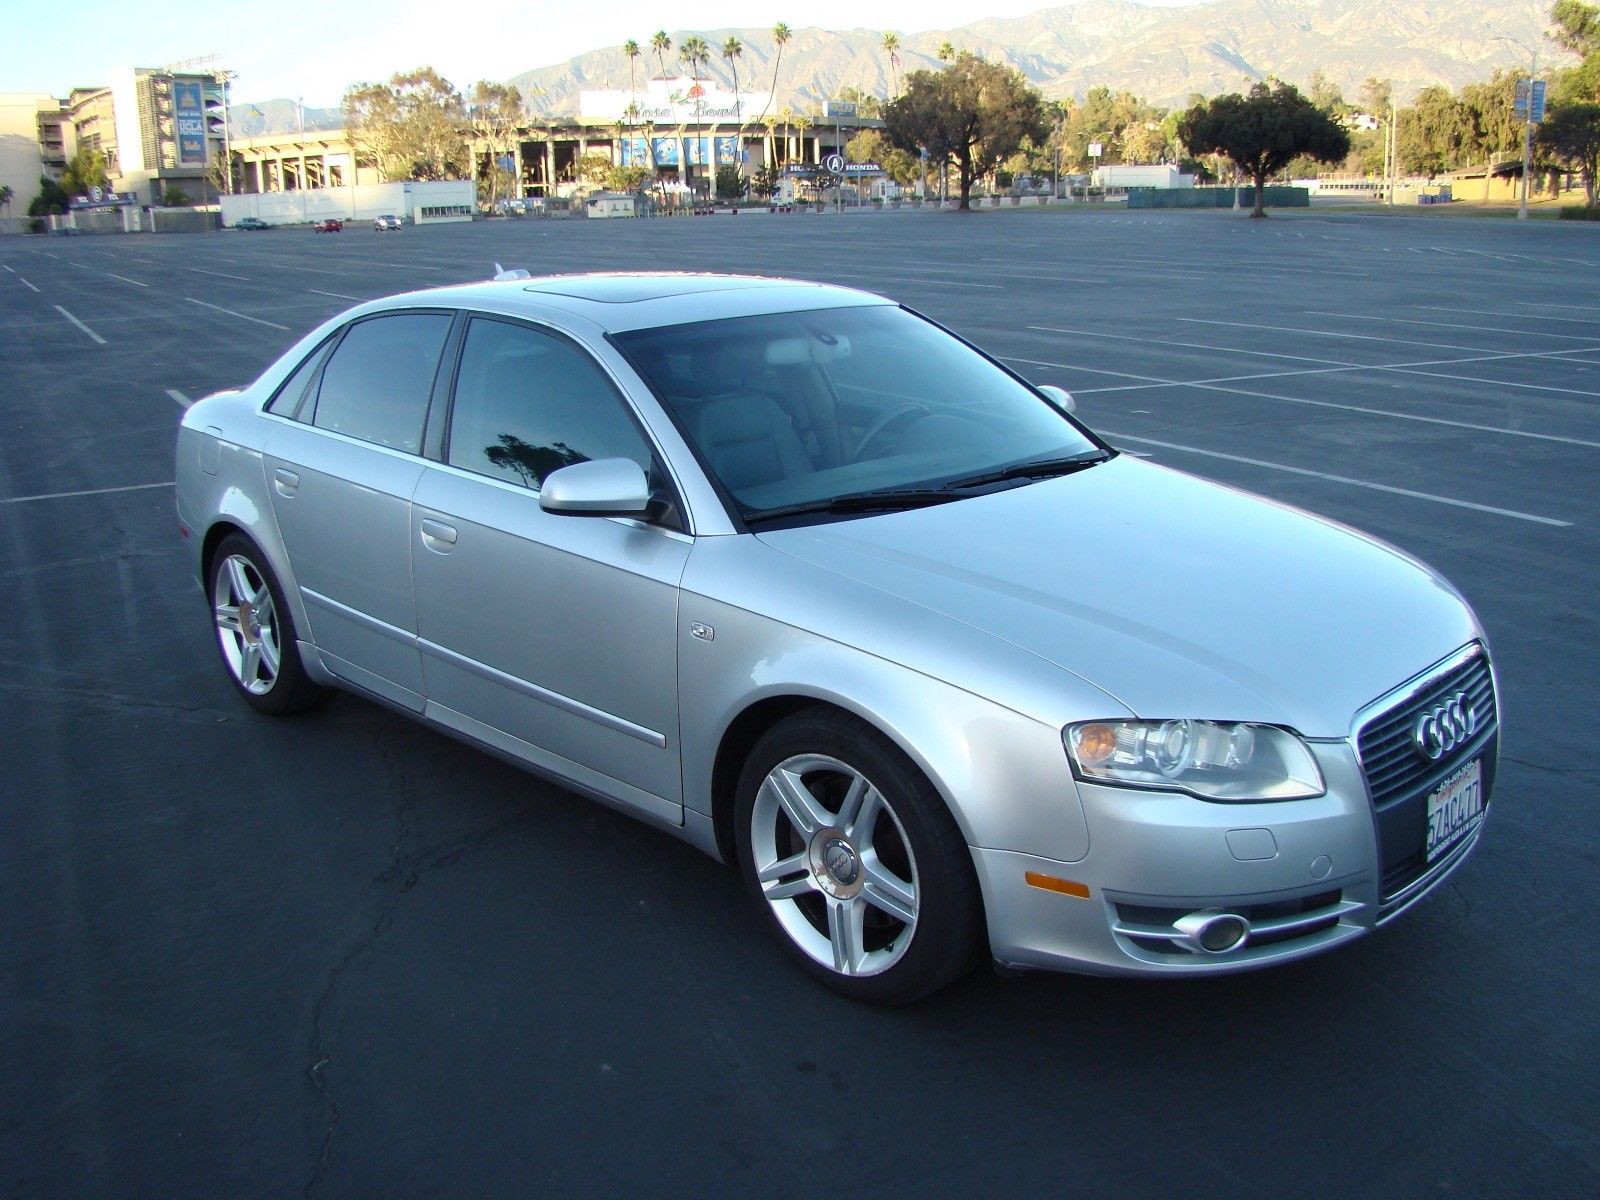 2005 Audi A4 2005 Audi A4 2.0 Turbo 2017/2018 is in stock and for sale 24CarShop.com